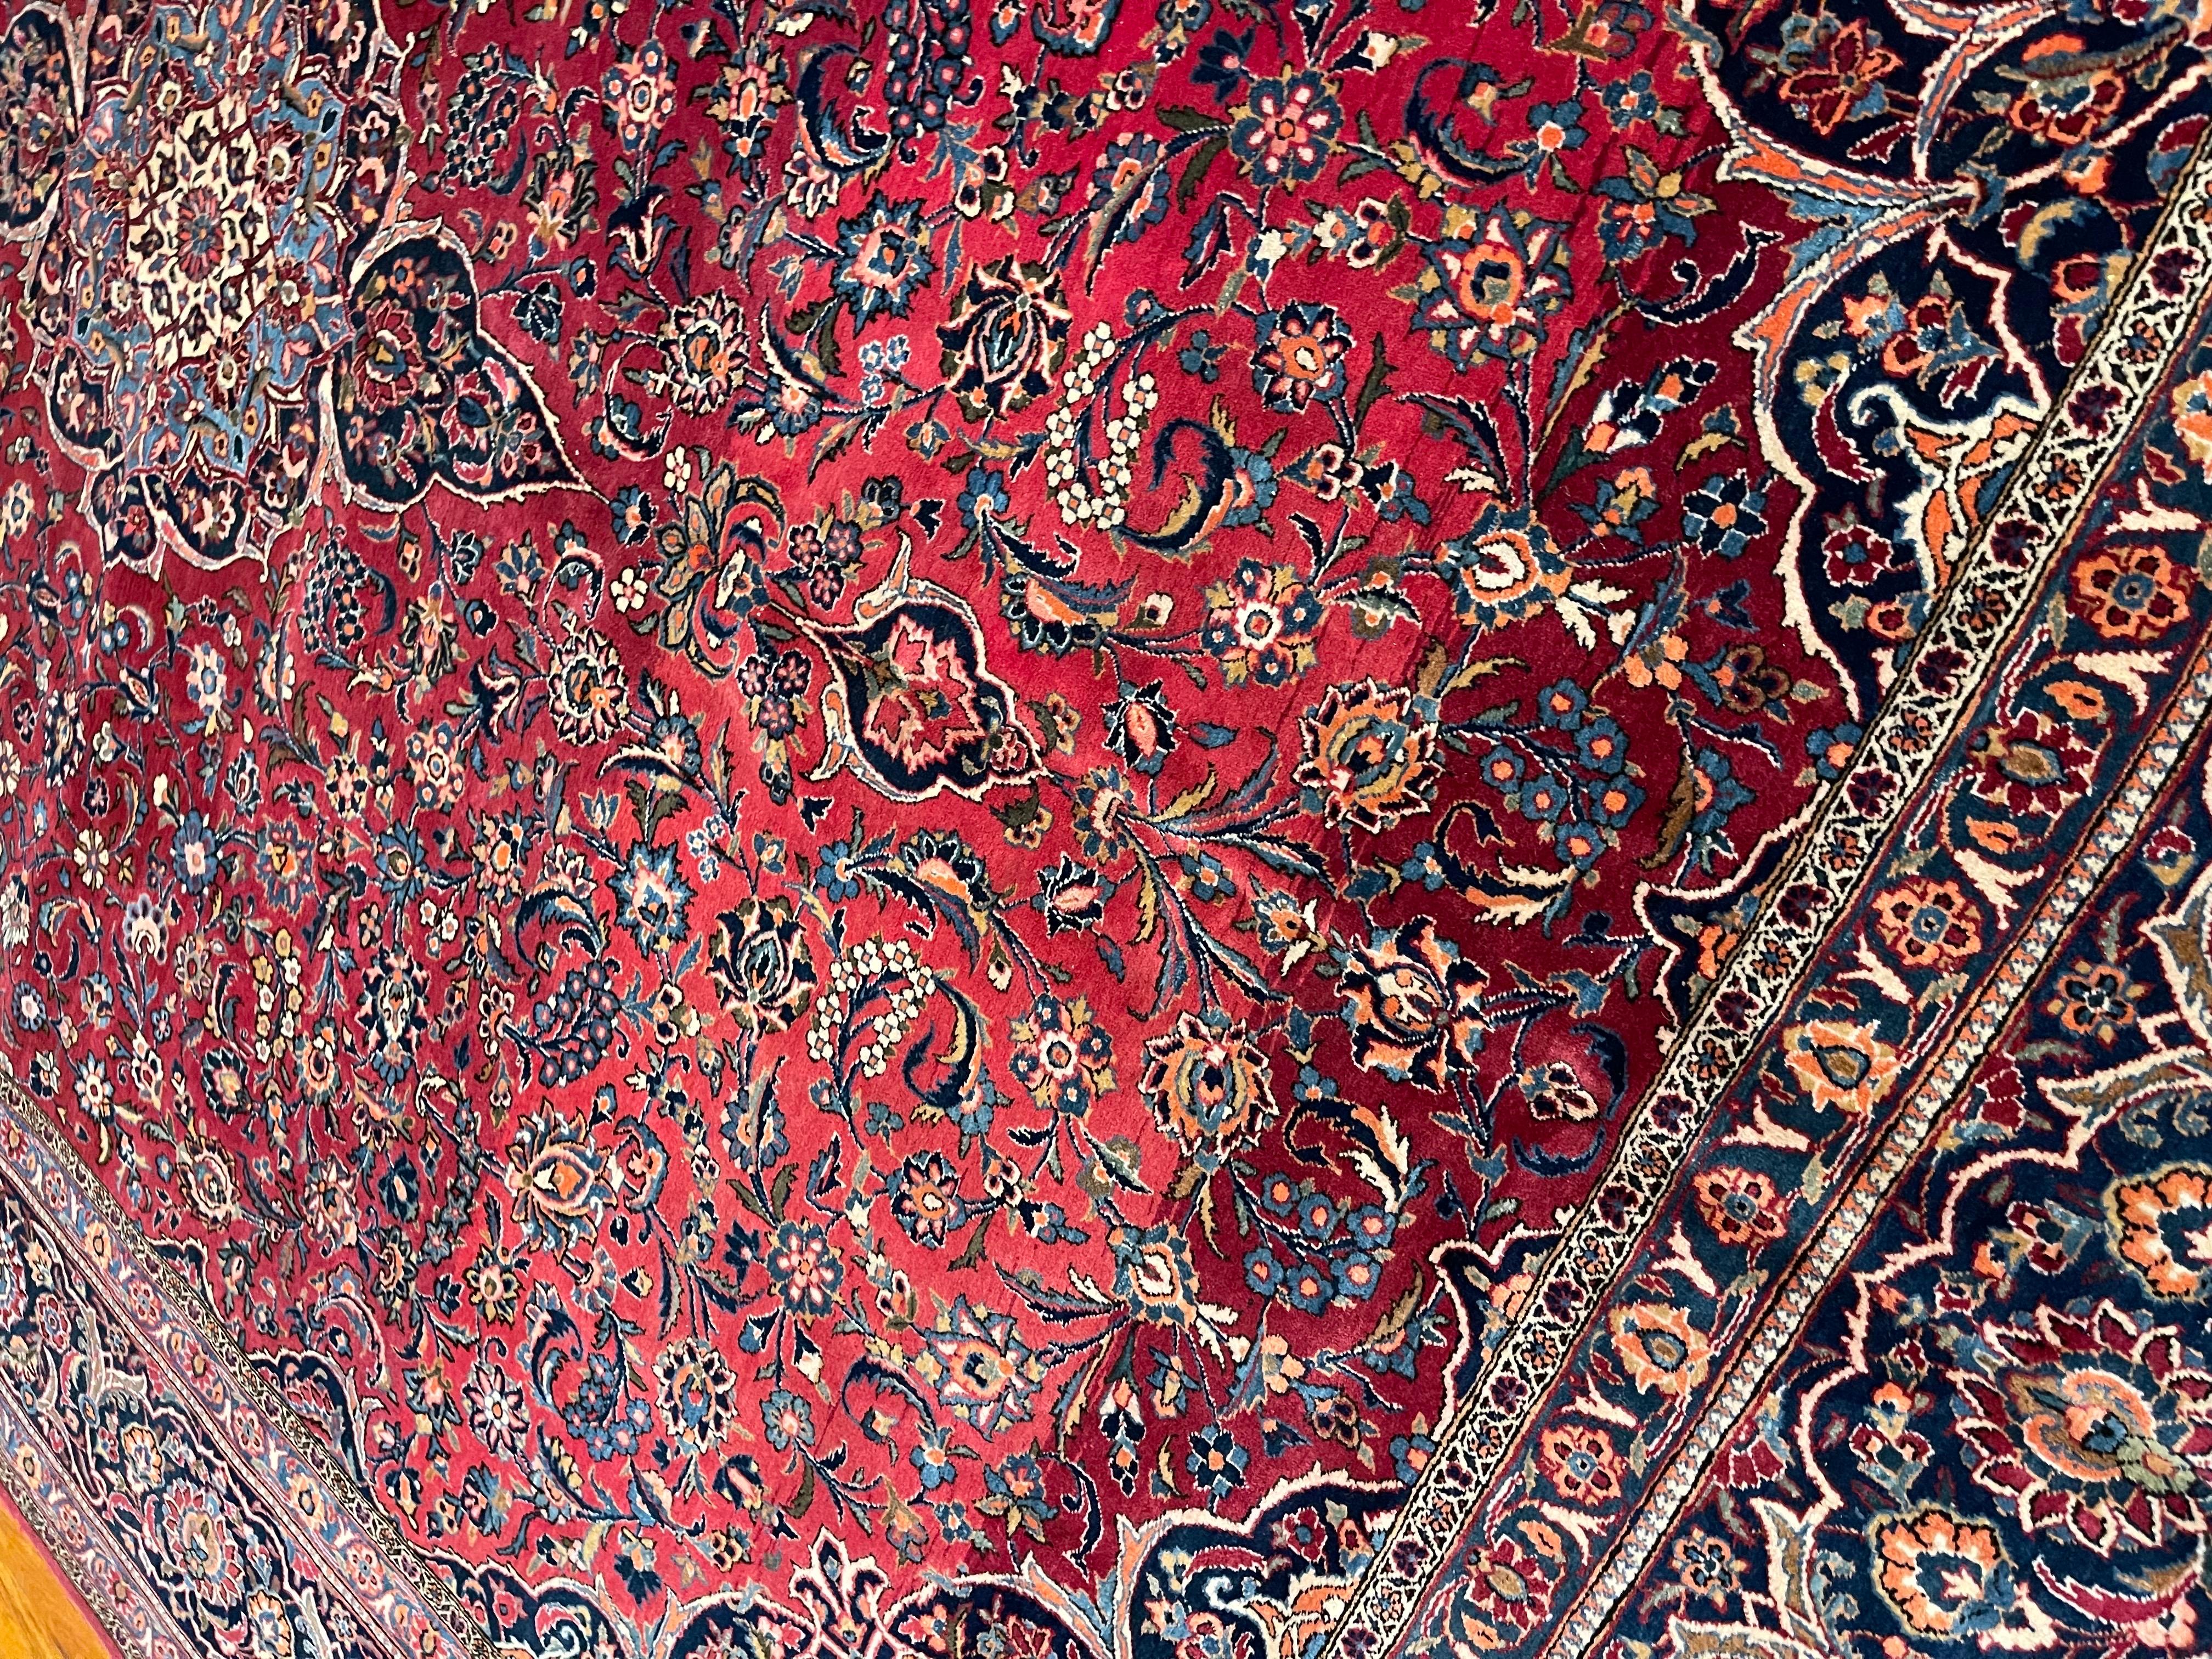 Introducing an exquisite piece of artistry, this authentic hand-knotted Persian Kashan rug embodies the timeless beauty and fine craftsmanship that define the traditional classifications of Persian rugs. This Kashan rug features a wool pile